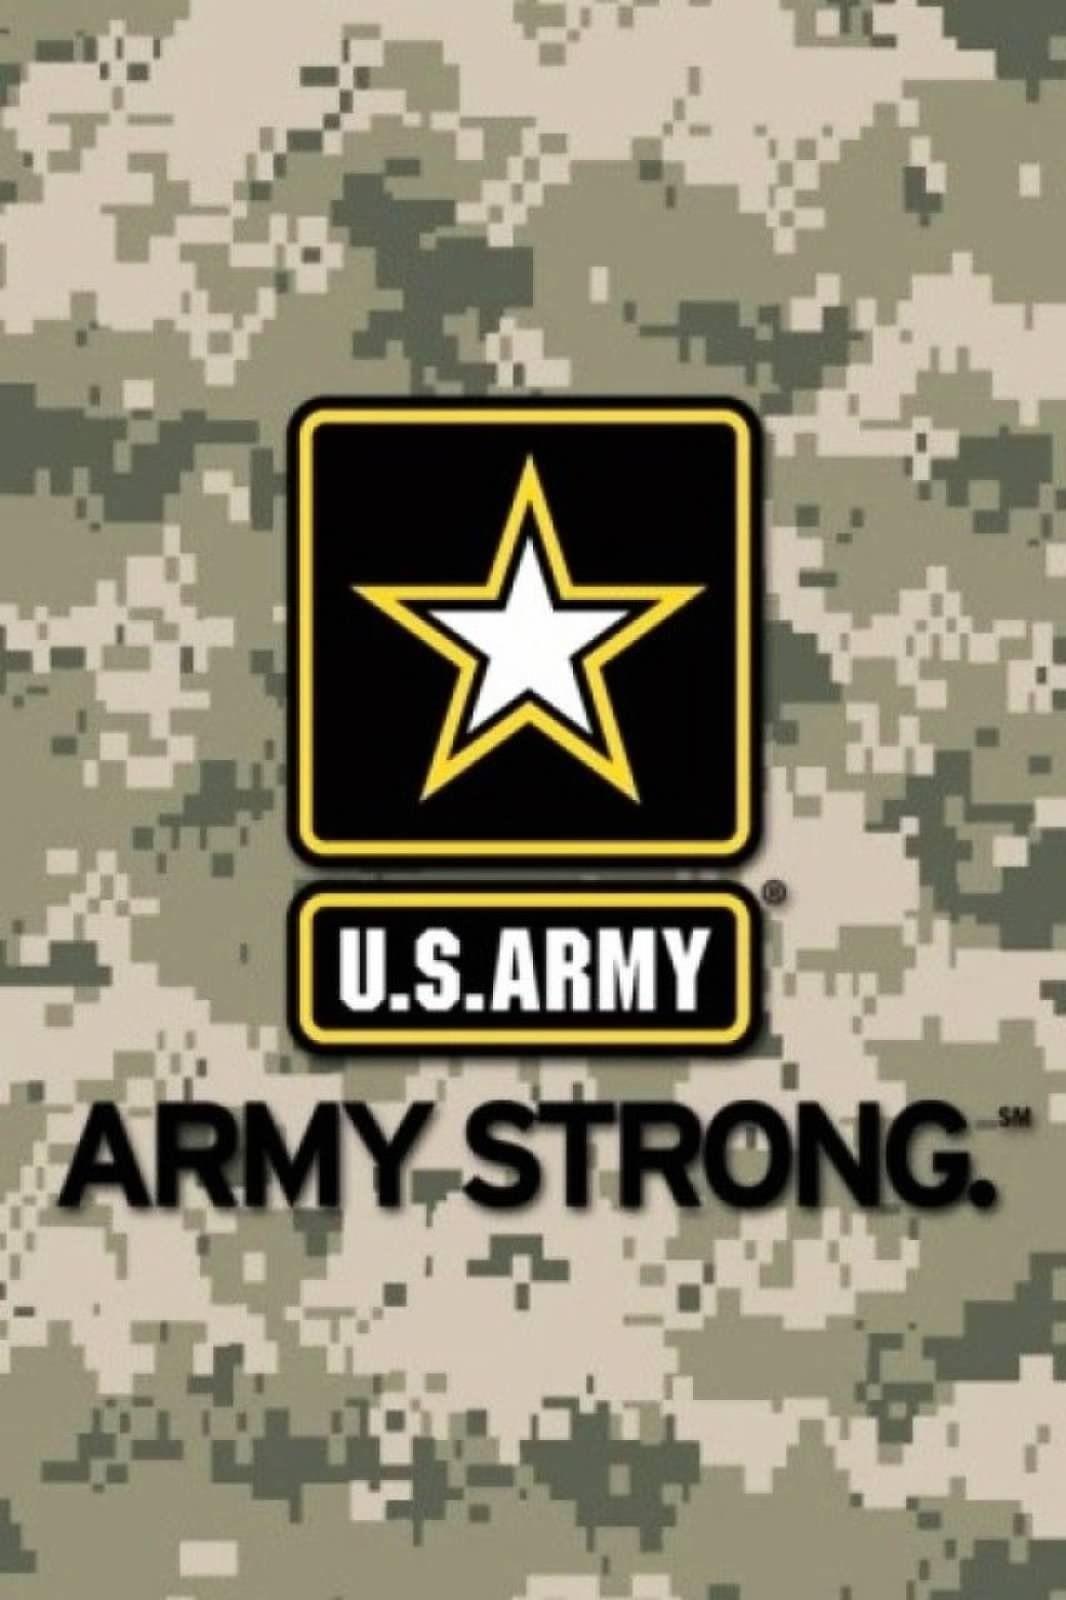 Soldiers Army Strong Logo - Pin by Debbie Farrell on Army Mom | Army, Military, Us army